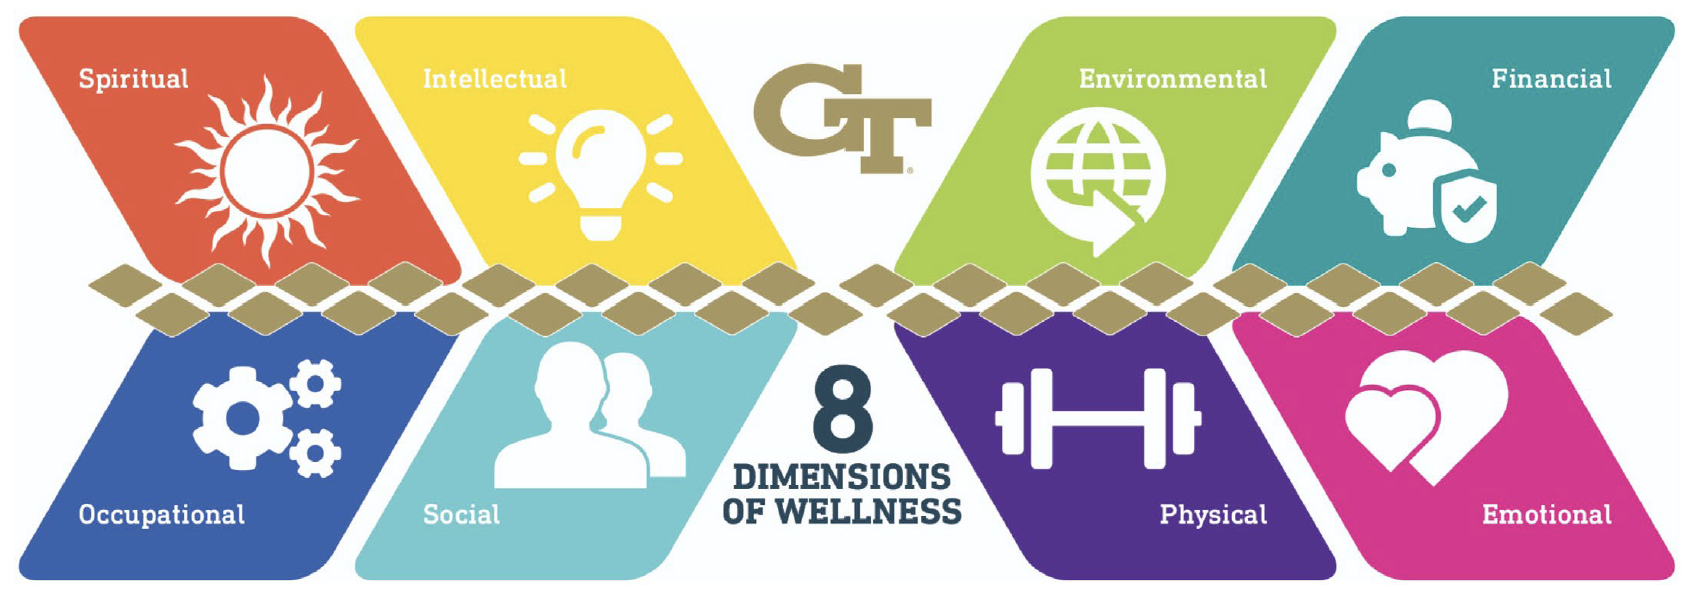 dimensions of well-being image